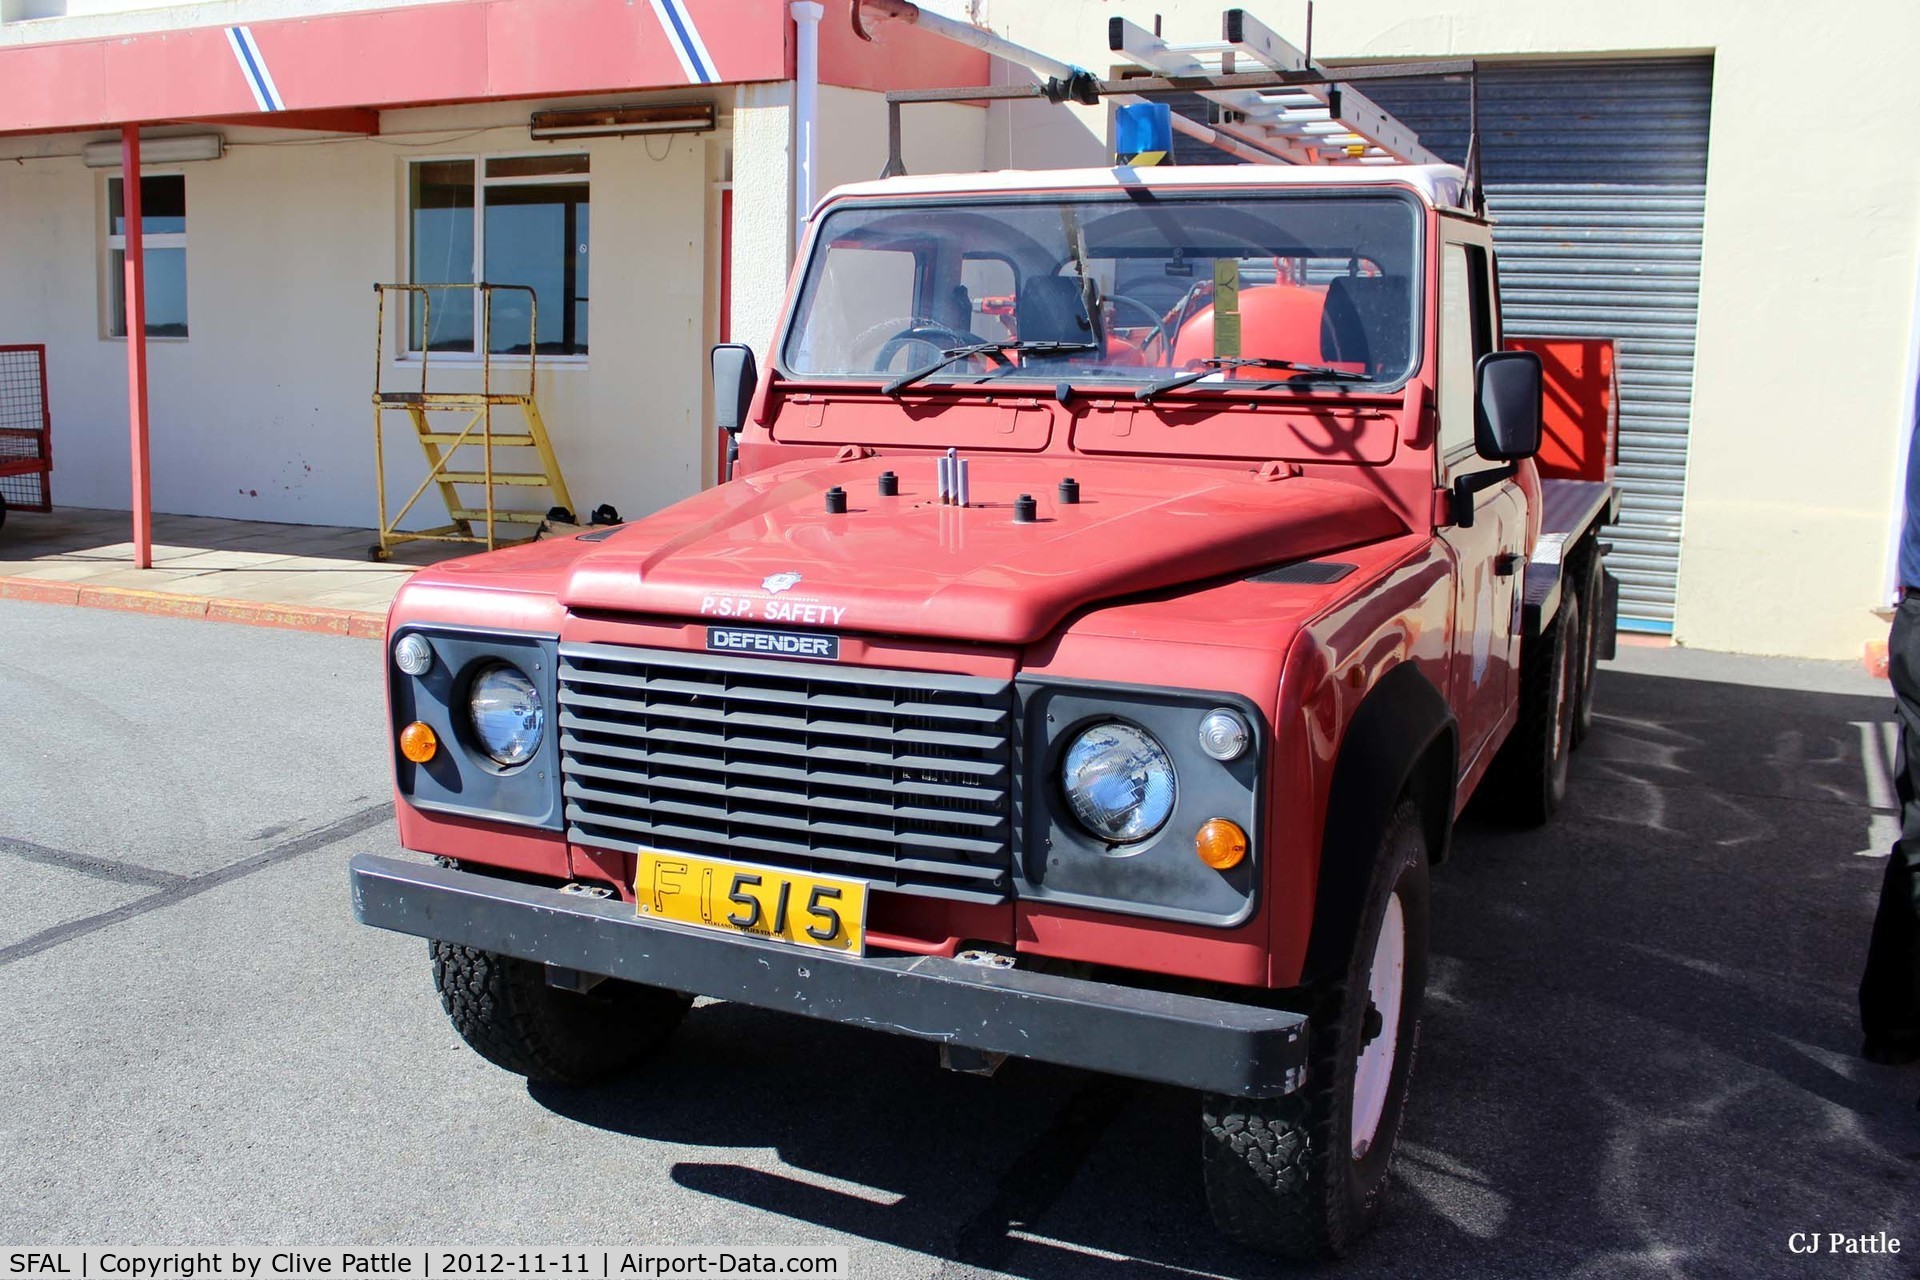 SFAL Airport - One of the older Landrover fire rescue vehicles at Port Stanley SFAL